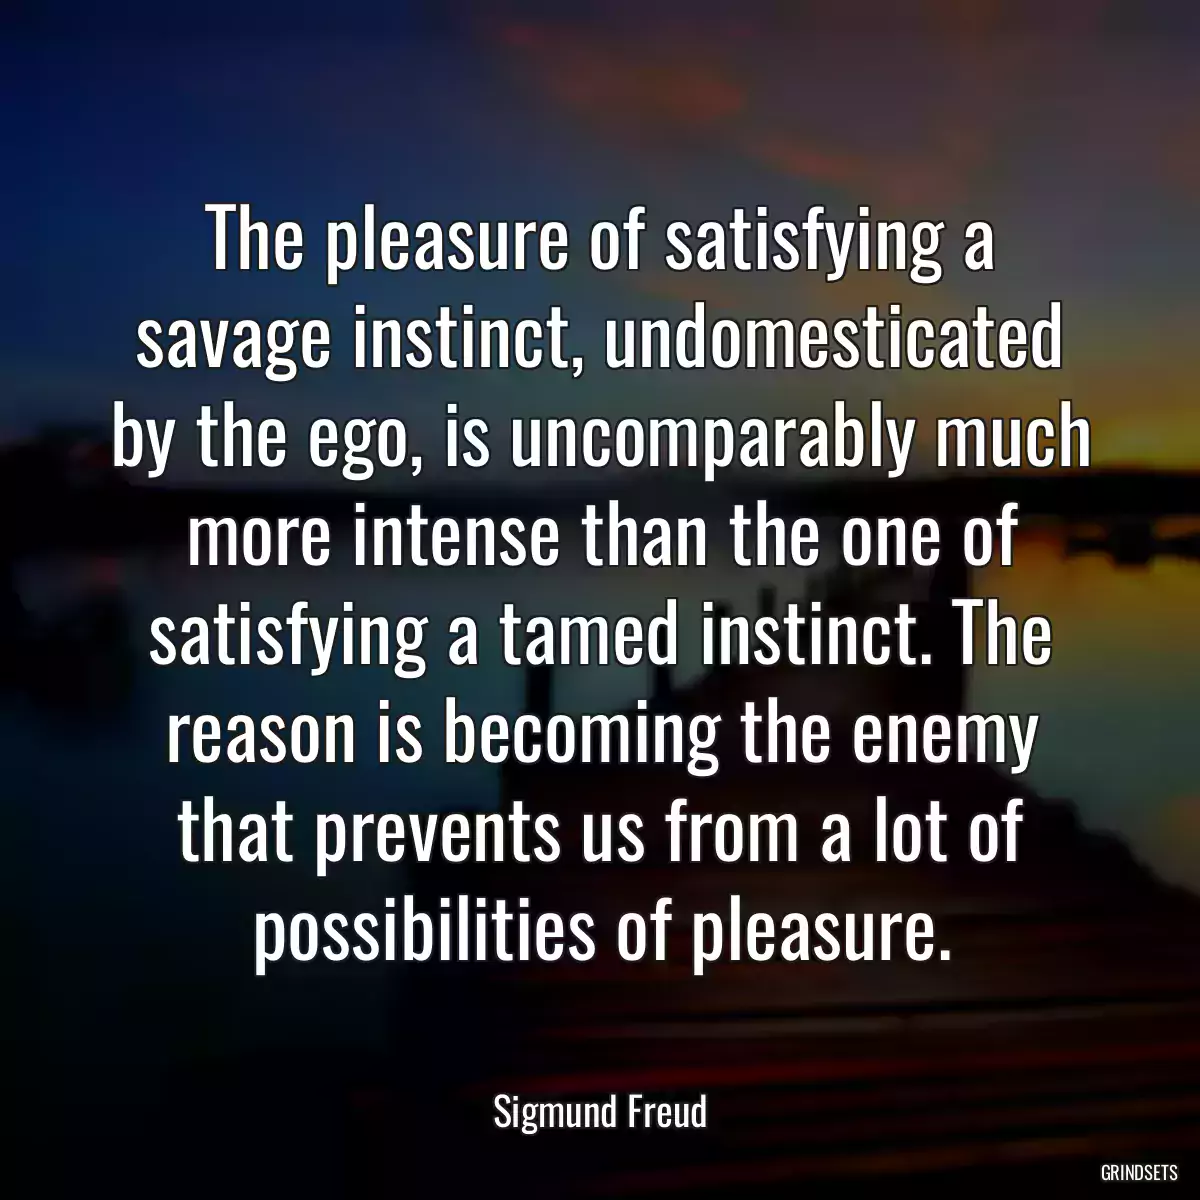 The pleasure of satisfying a savage instinct, undomesticated by the ego, is uncomparably much more intense than the one of satisfying a tamed instinct. The reason is becoming the enemy that prevents us from a lot of possibilities of pleasure.